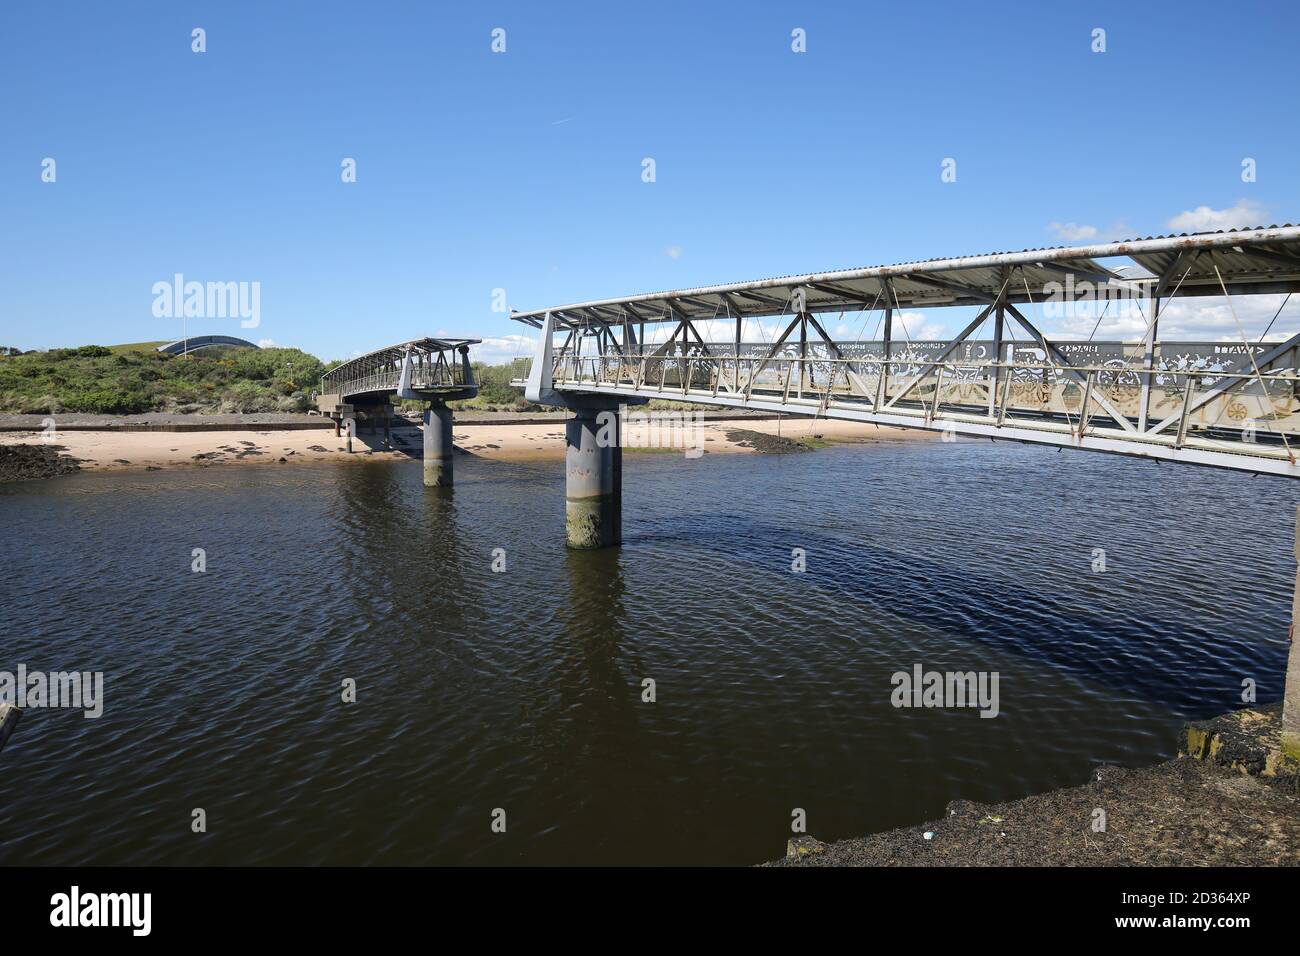 The Bridge of Scottish Invention is a retractable footbridge across the River Irvine which gave access to 'The Big Idea' A millenium project in Irvine Stock Photo